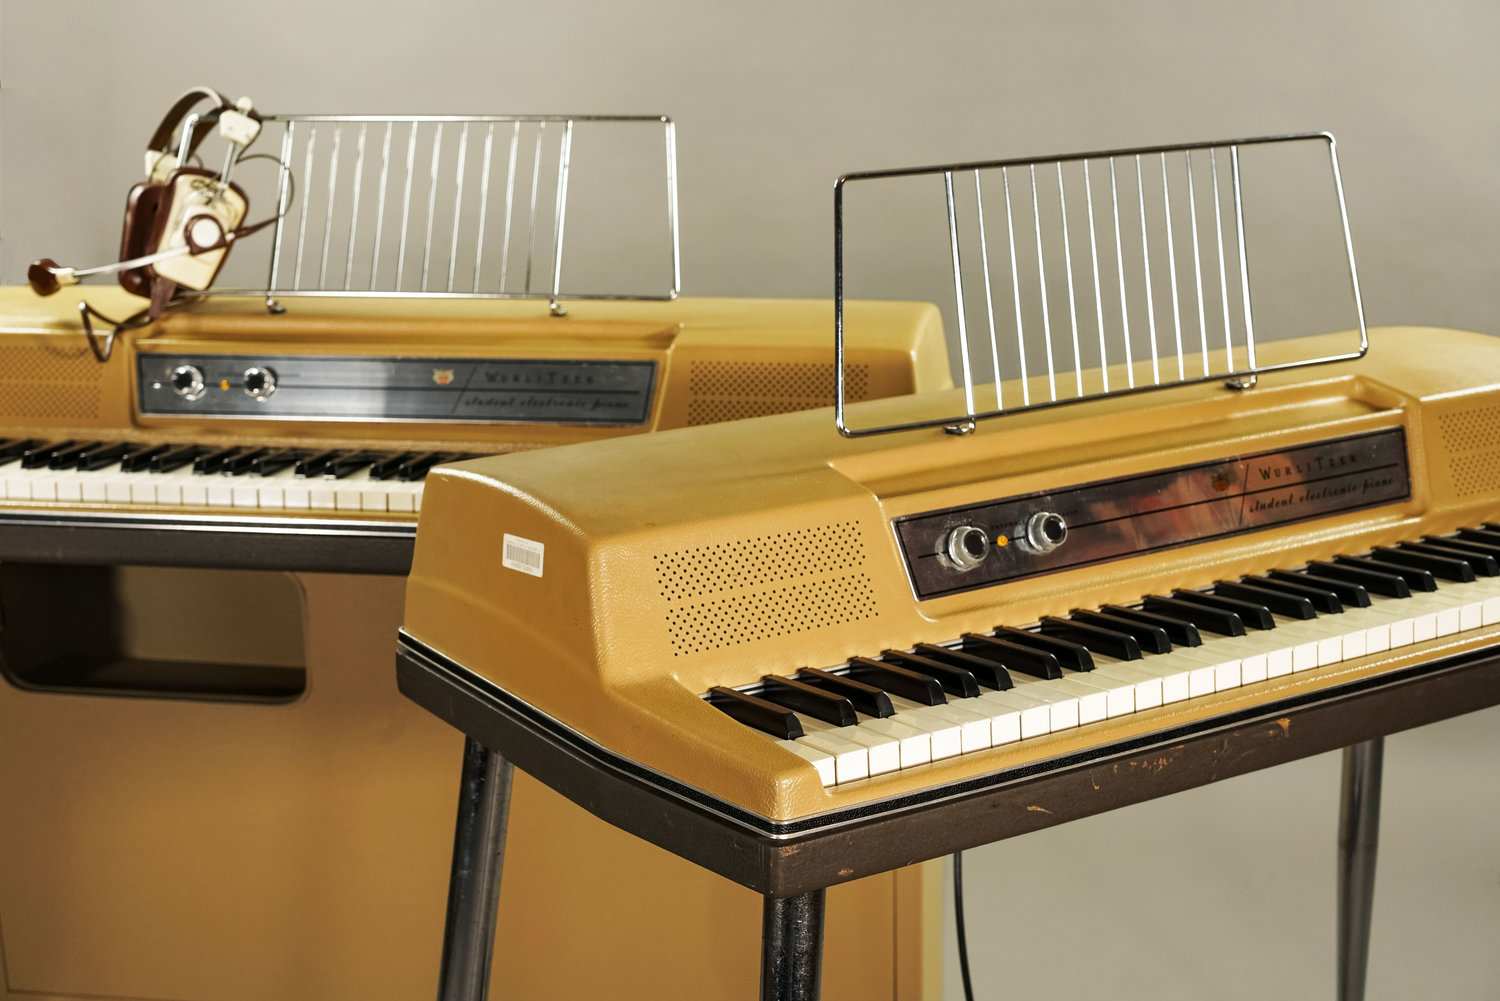 Differences Between the Wurlitzer 140 and 200a